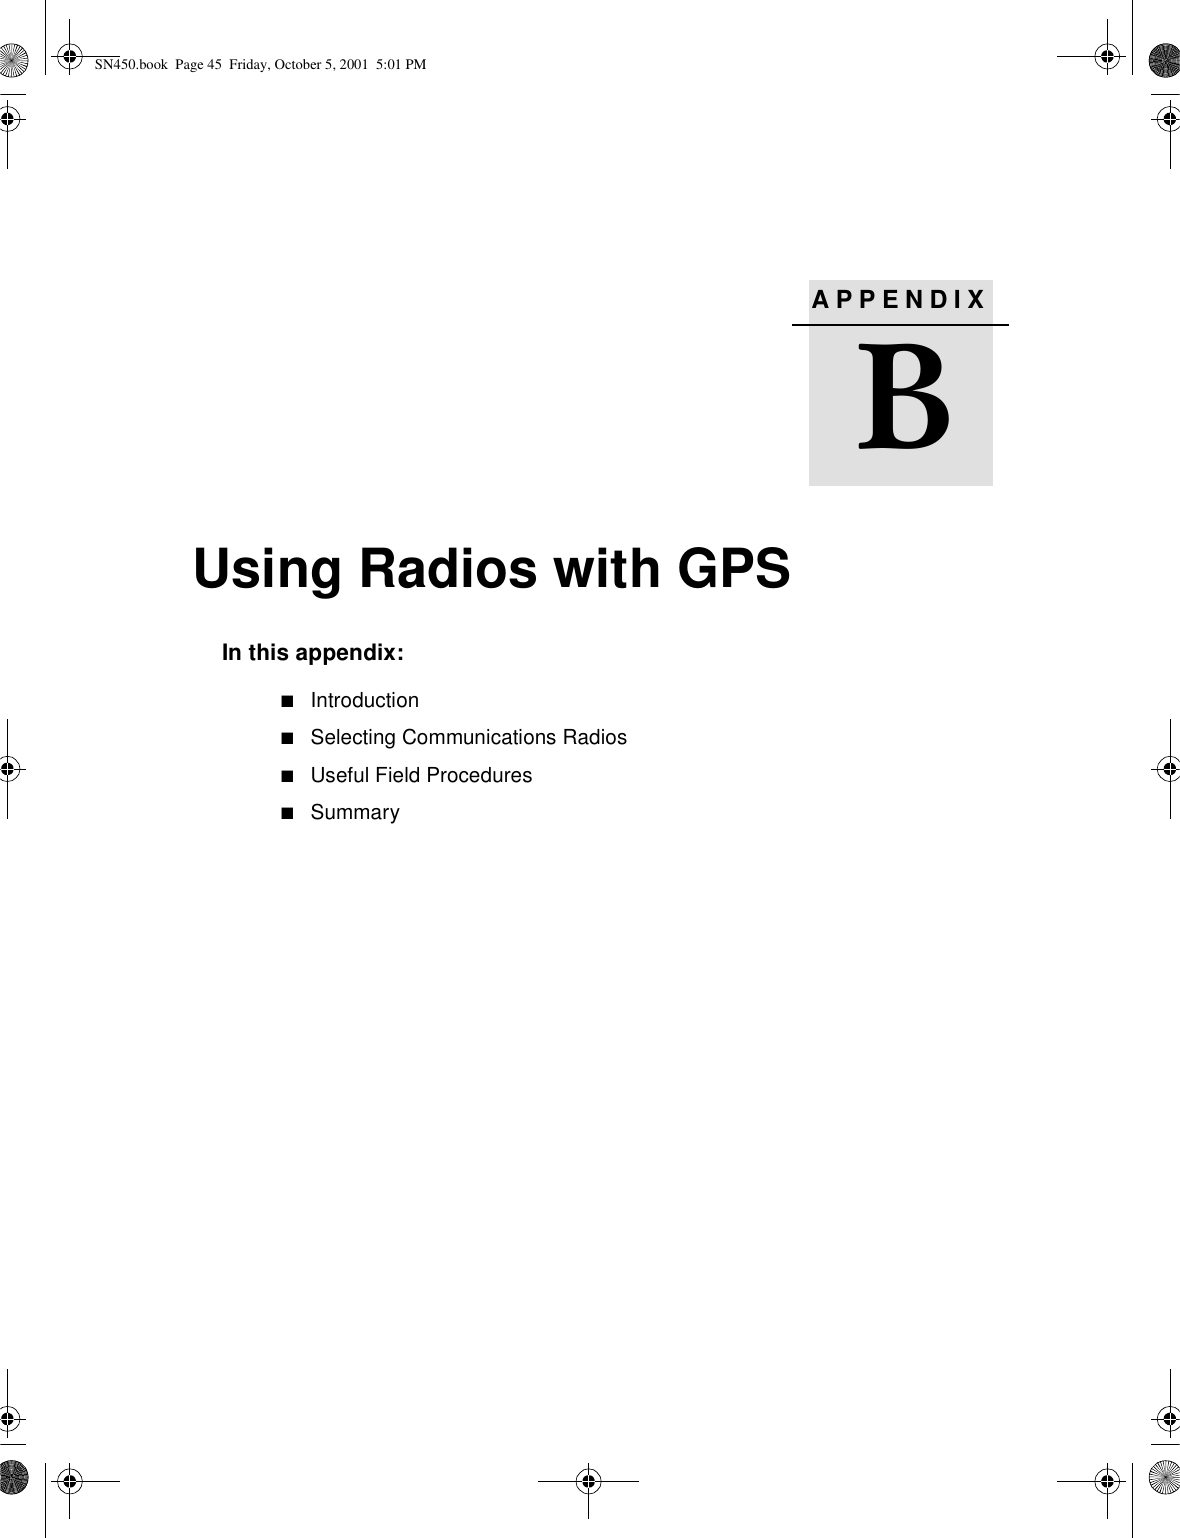 APPENDIXBUsing Radios with GPSBIn this appendix:■Introduction■Selecting Communications Radios■Useful Field Procedures■SummarySN450.book  Page 45  Friday, October 5, 2001  5:01 PM